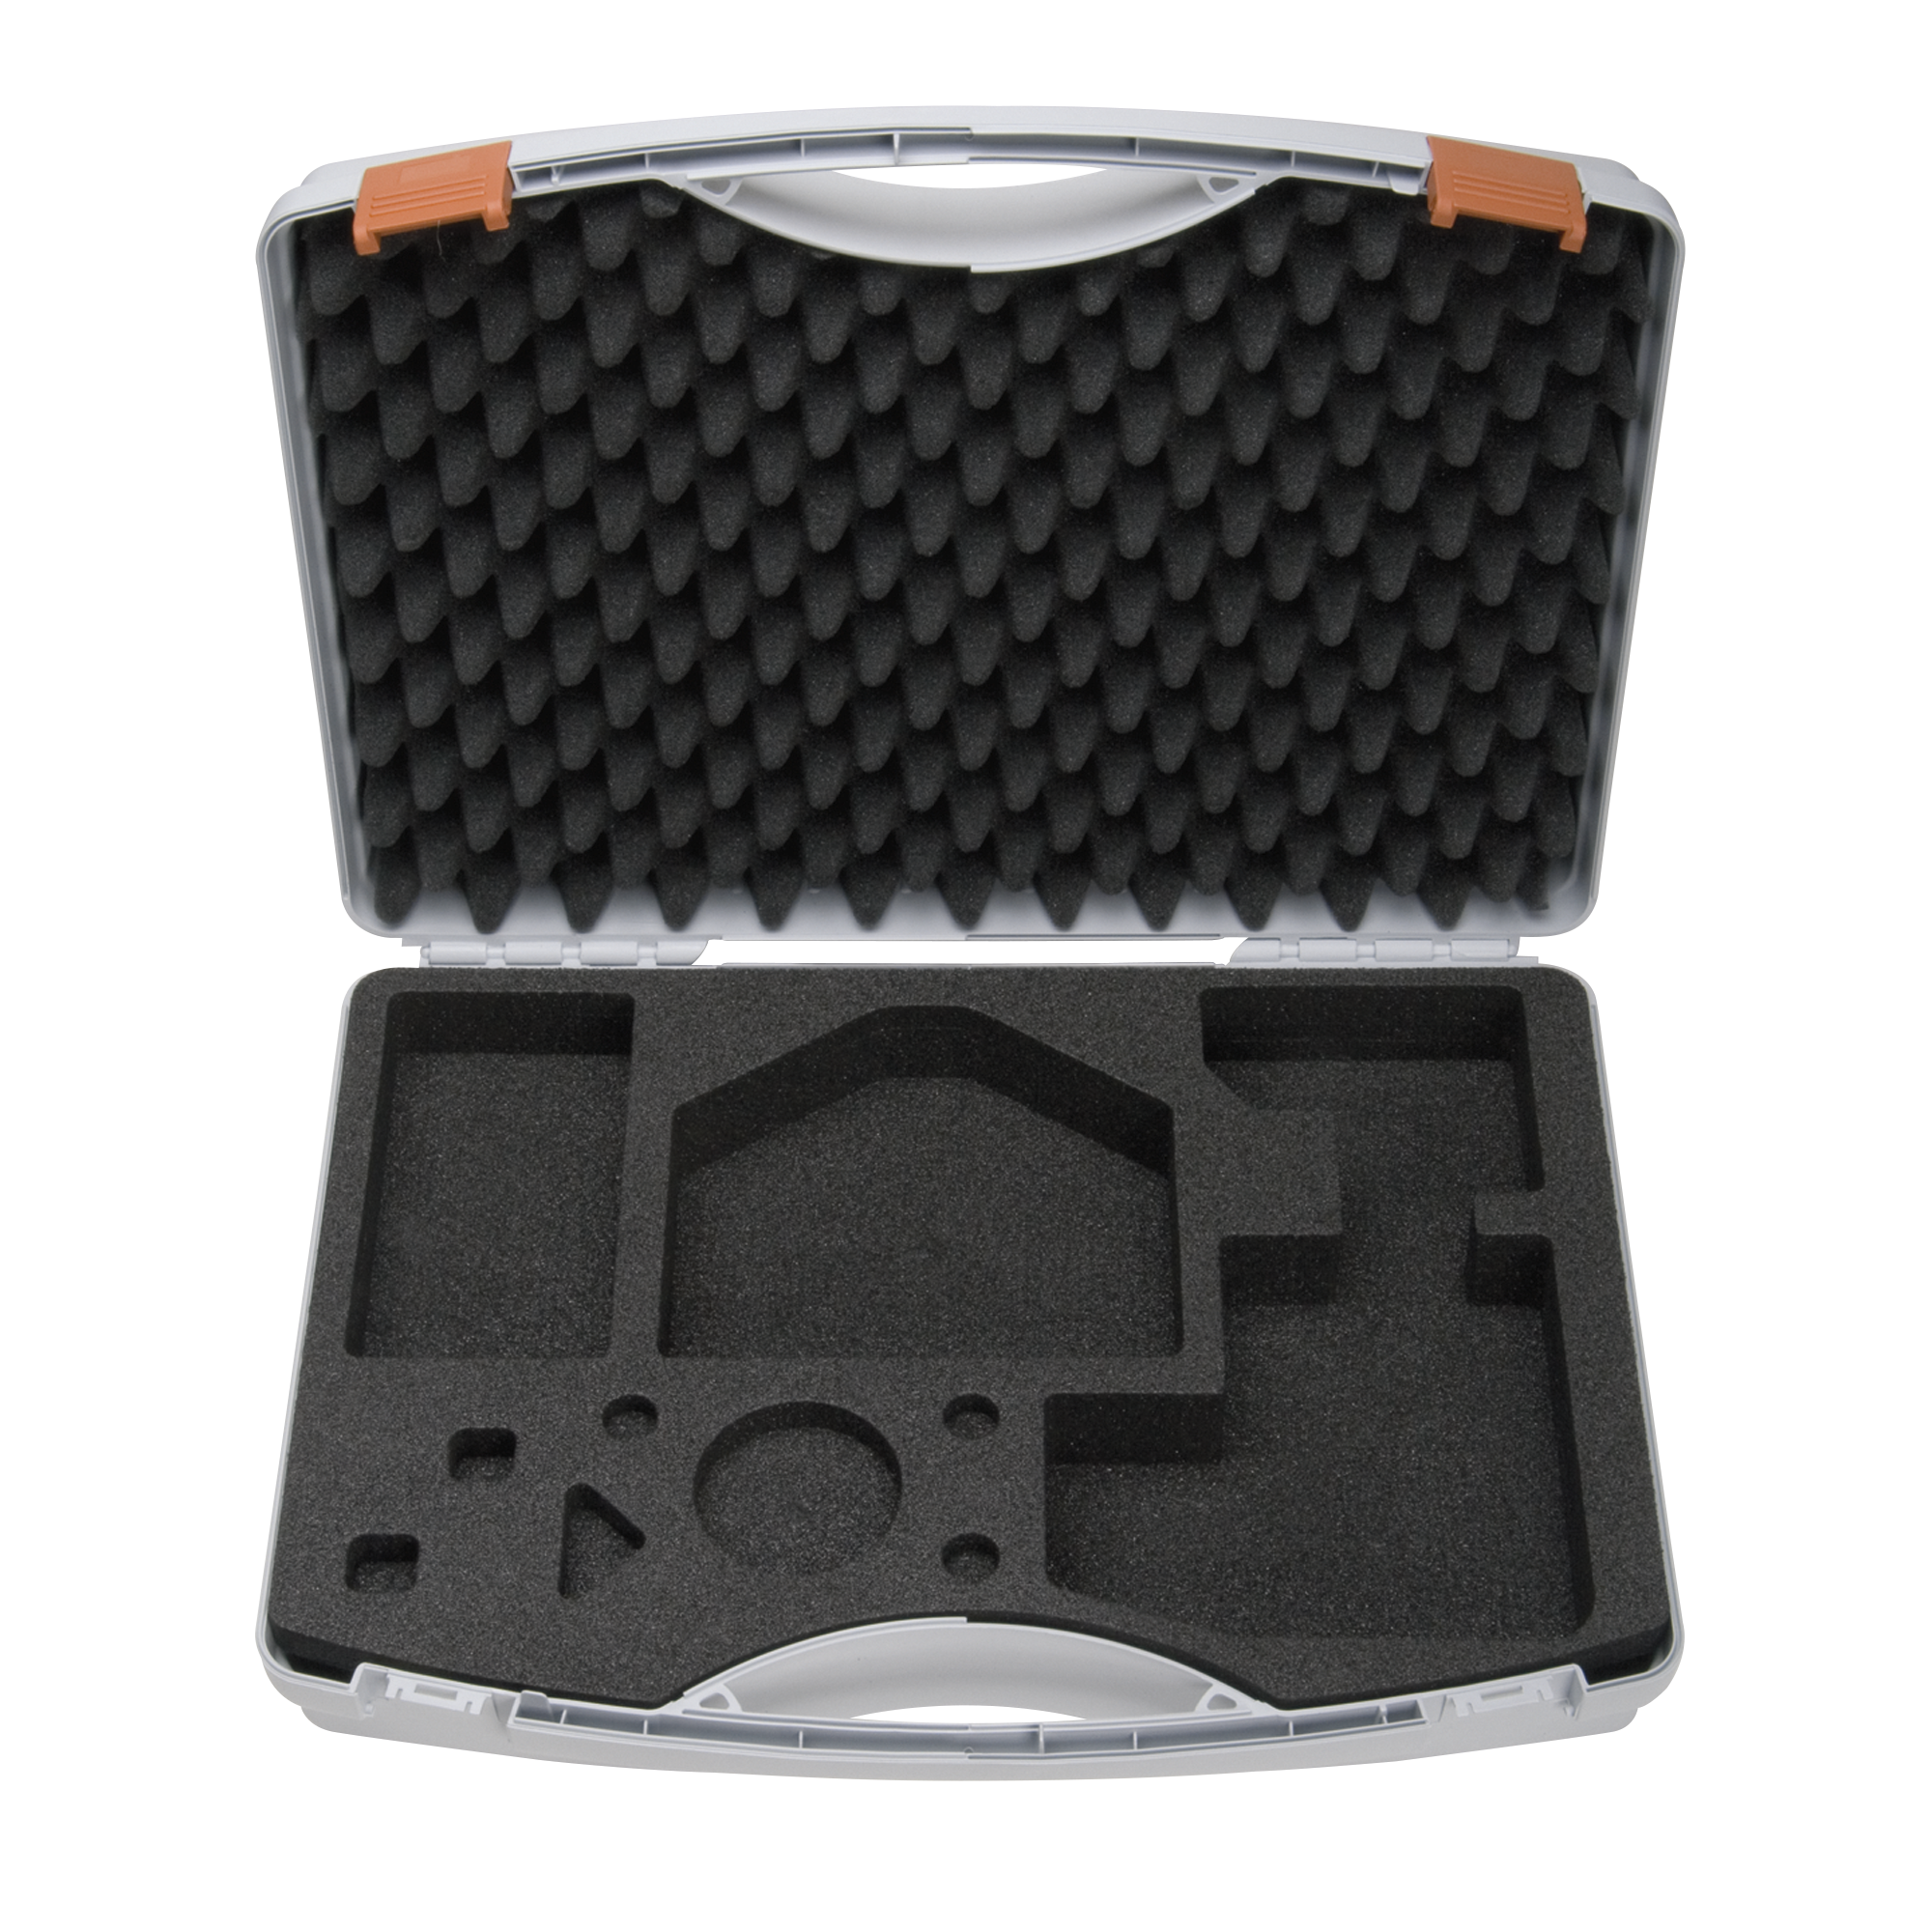 HEINE Case for Indirect Ophthalmoscope Set C-281